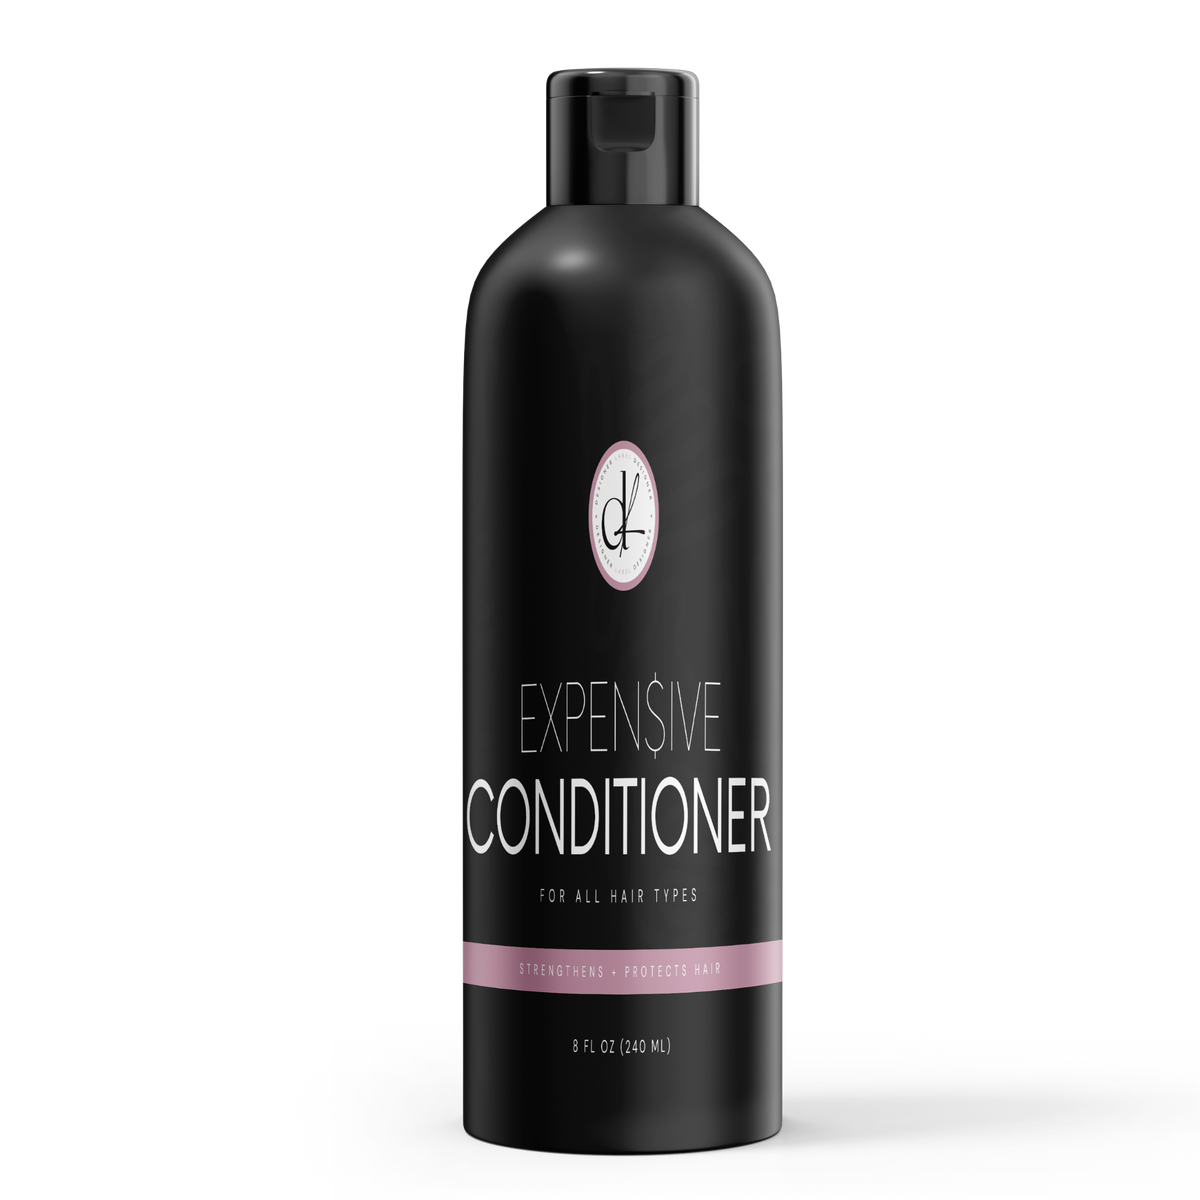 Expen$ive Conditioner